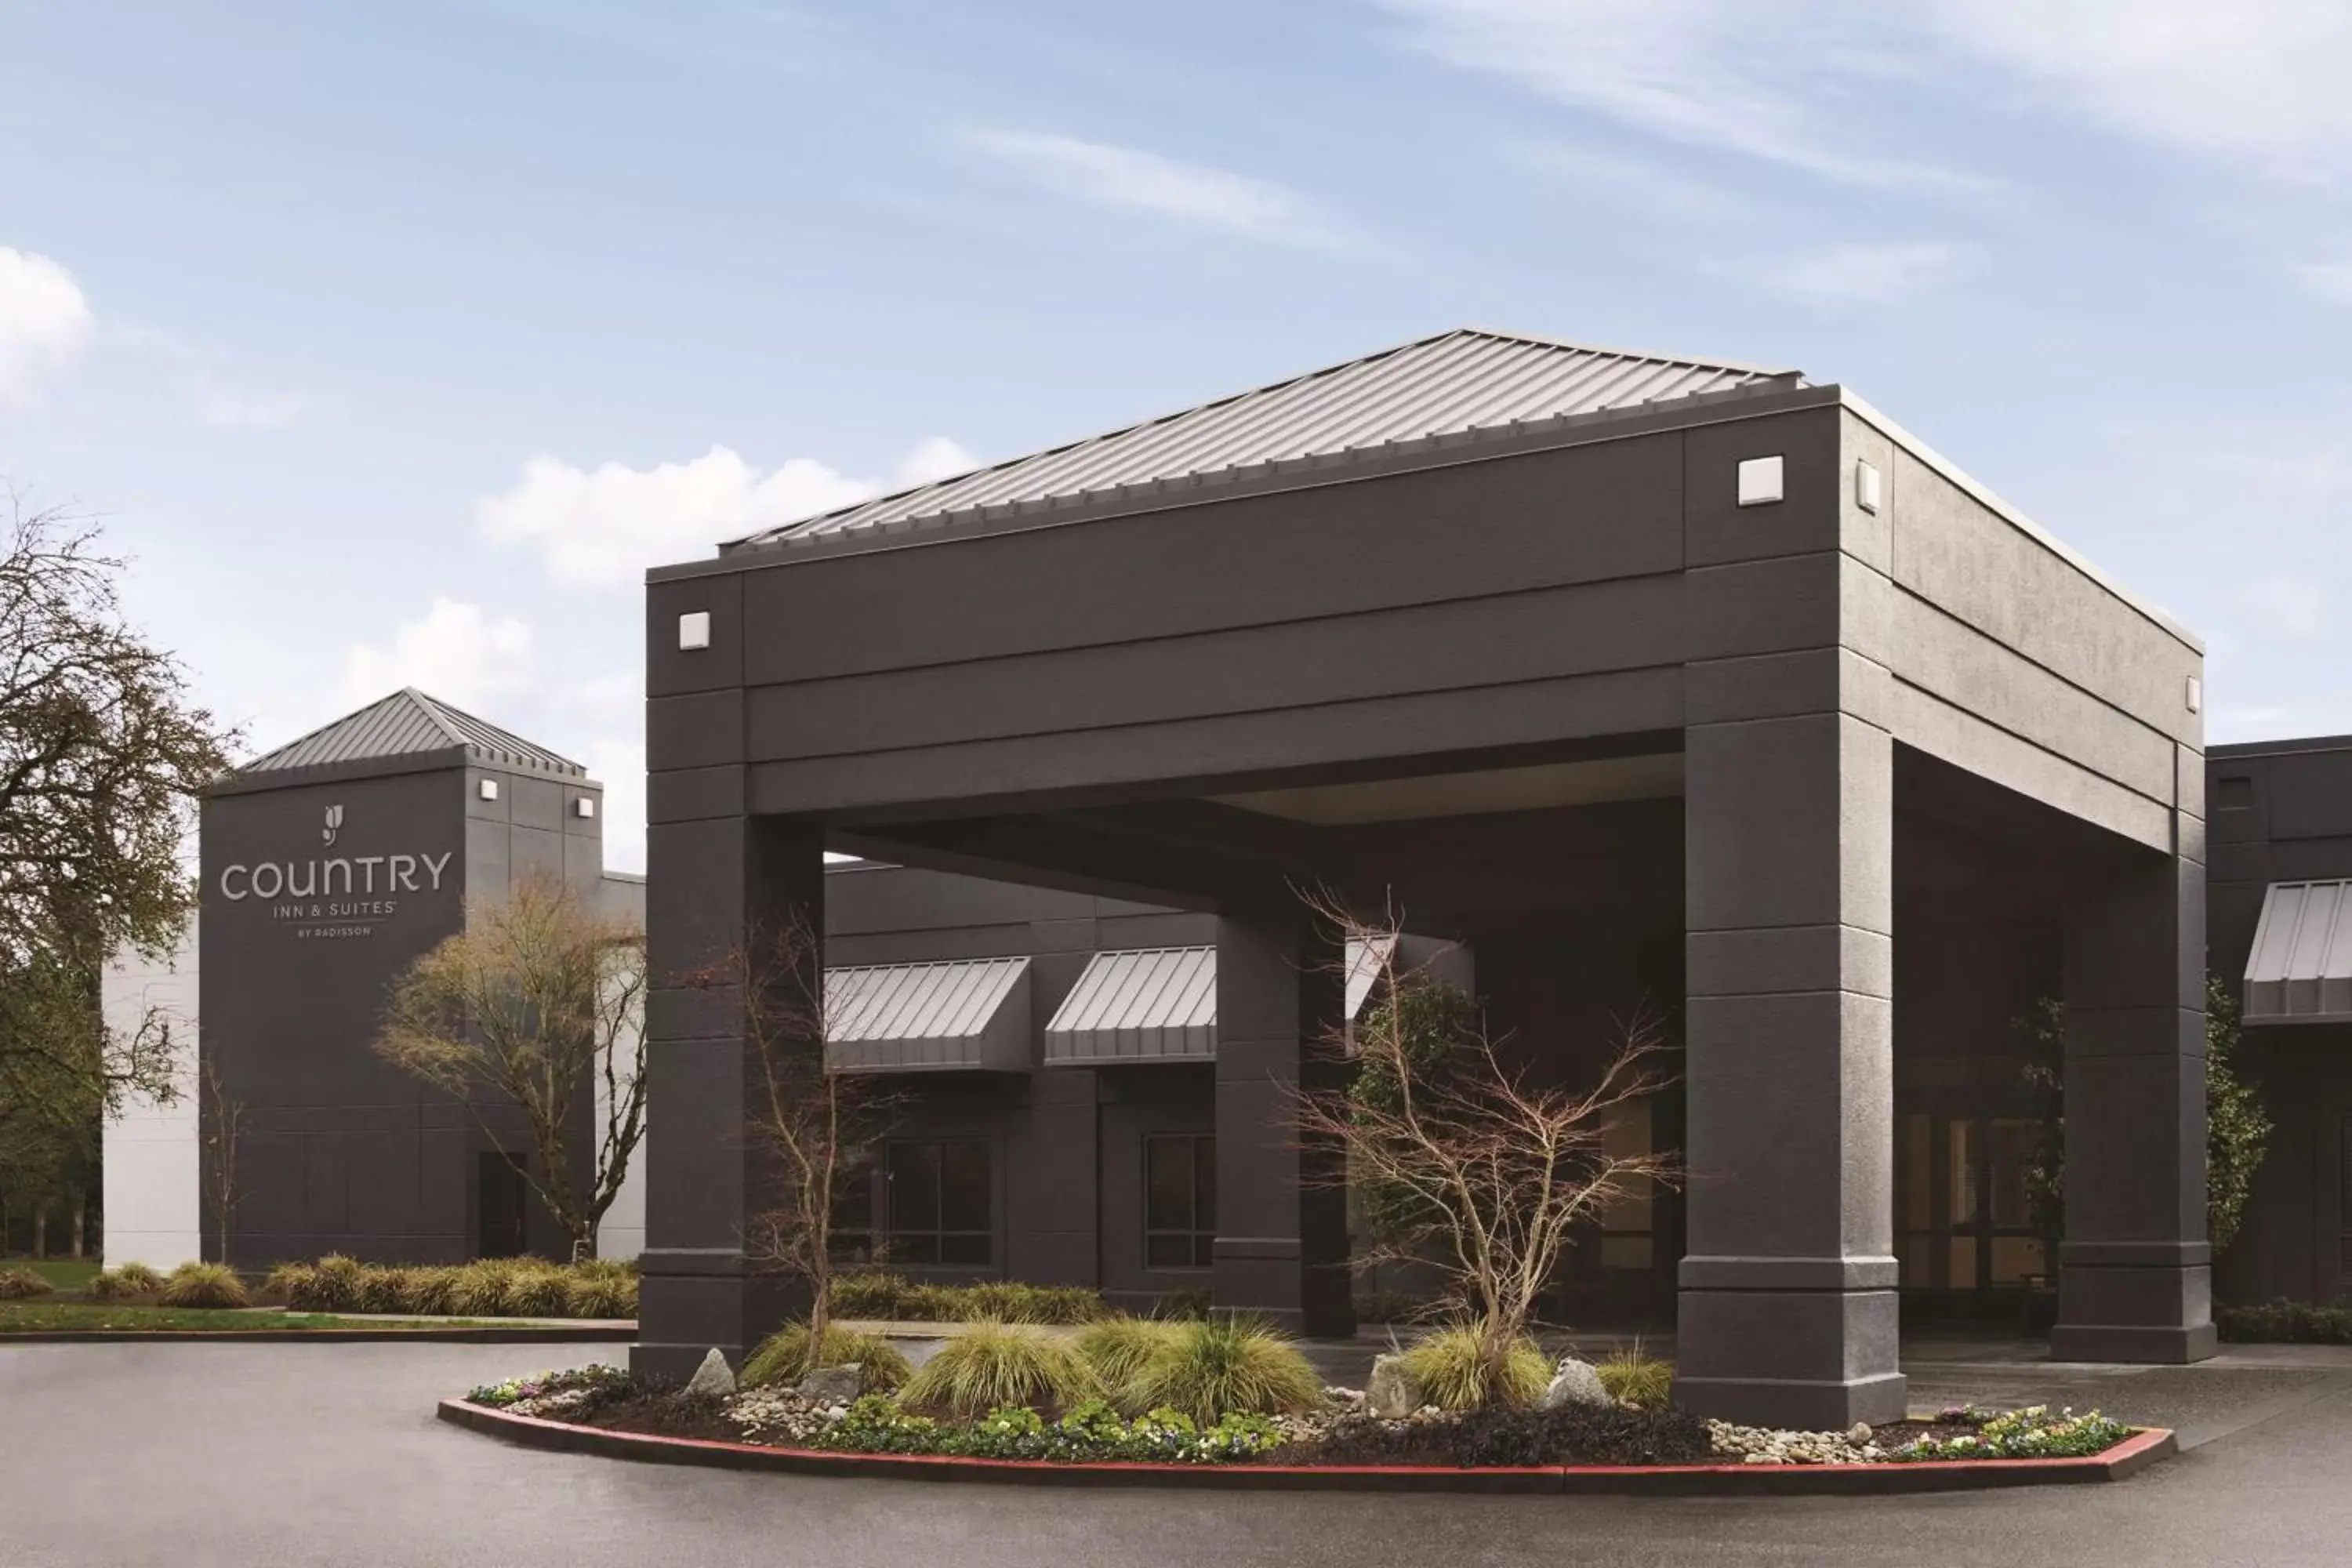 Property building in Country Inn & Suites by Radisson, Seattle-Bothell, WA